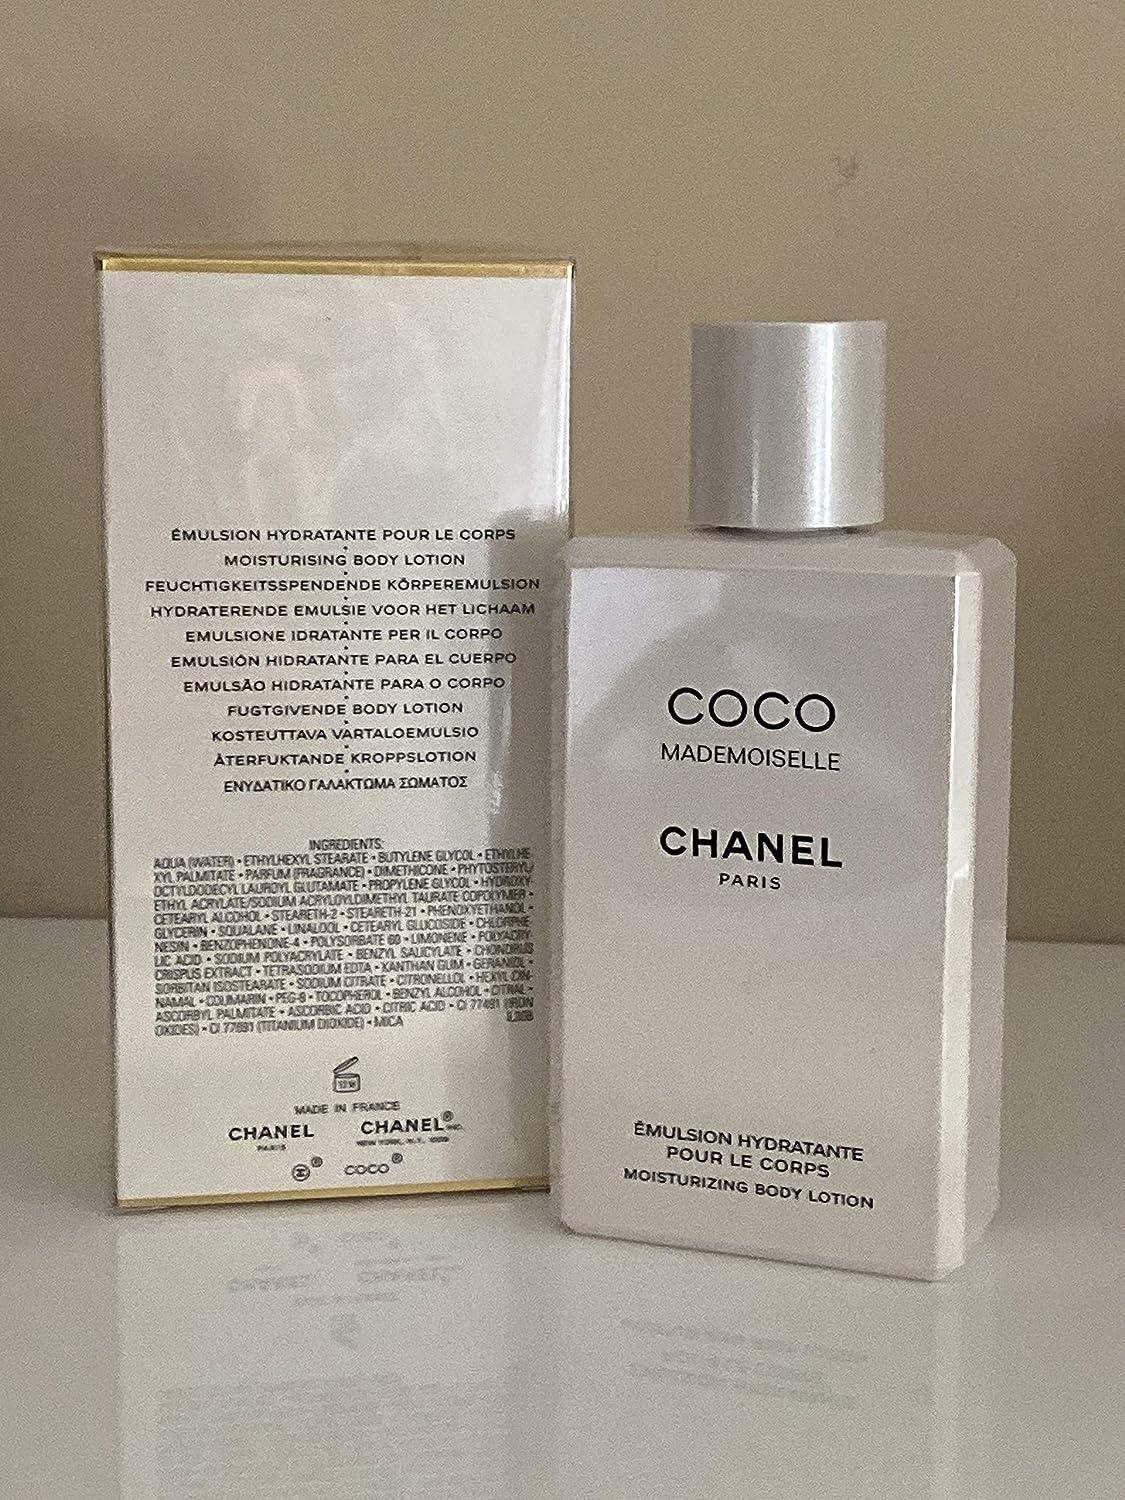 CHANEL No 19 For Women Body Lotion 6.8 Oz / 200ml IN SEALED BOX